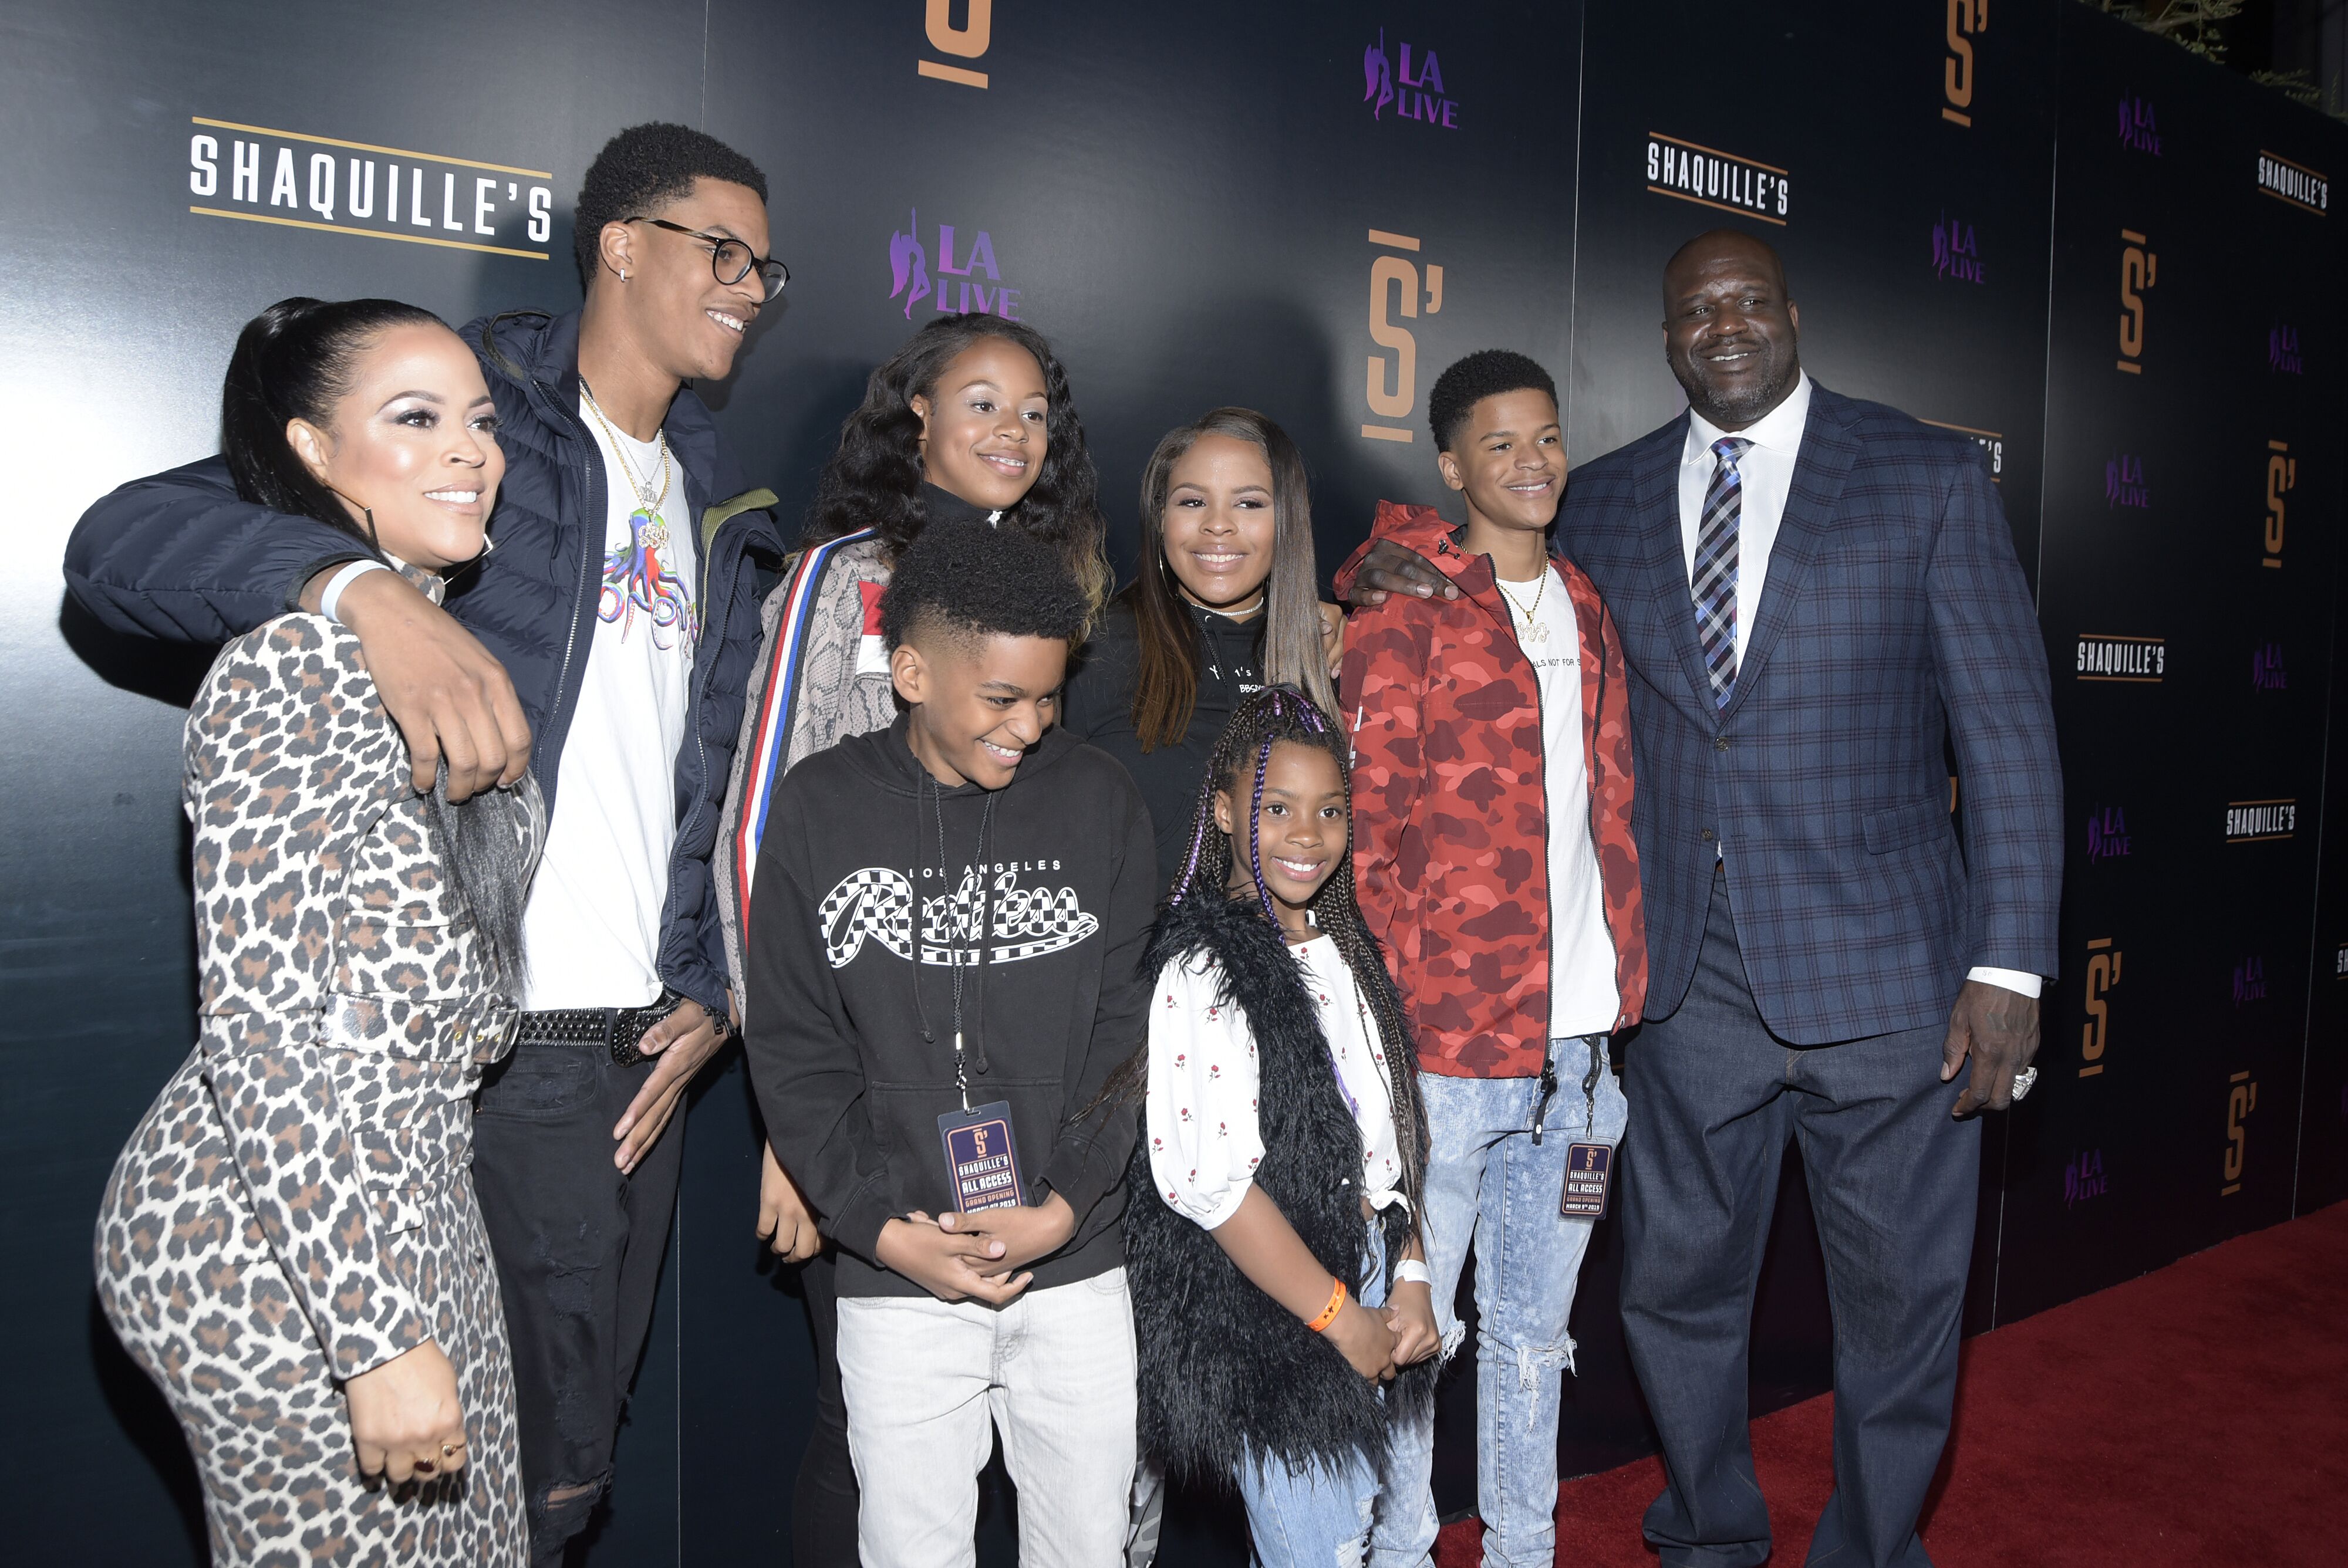 The O'Neal family attend the opening of the restaurant joint "SHAQUILLE'S" in Los Angeles, California | Source: Getty Images/GlobalImagesUkraine